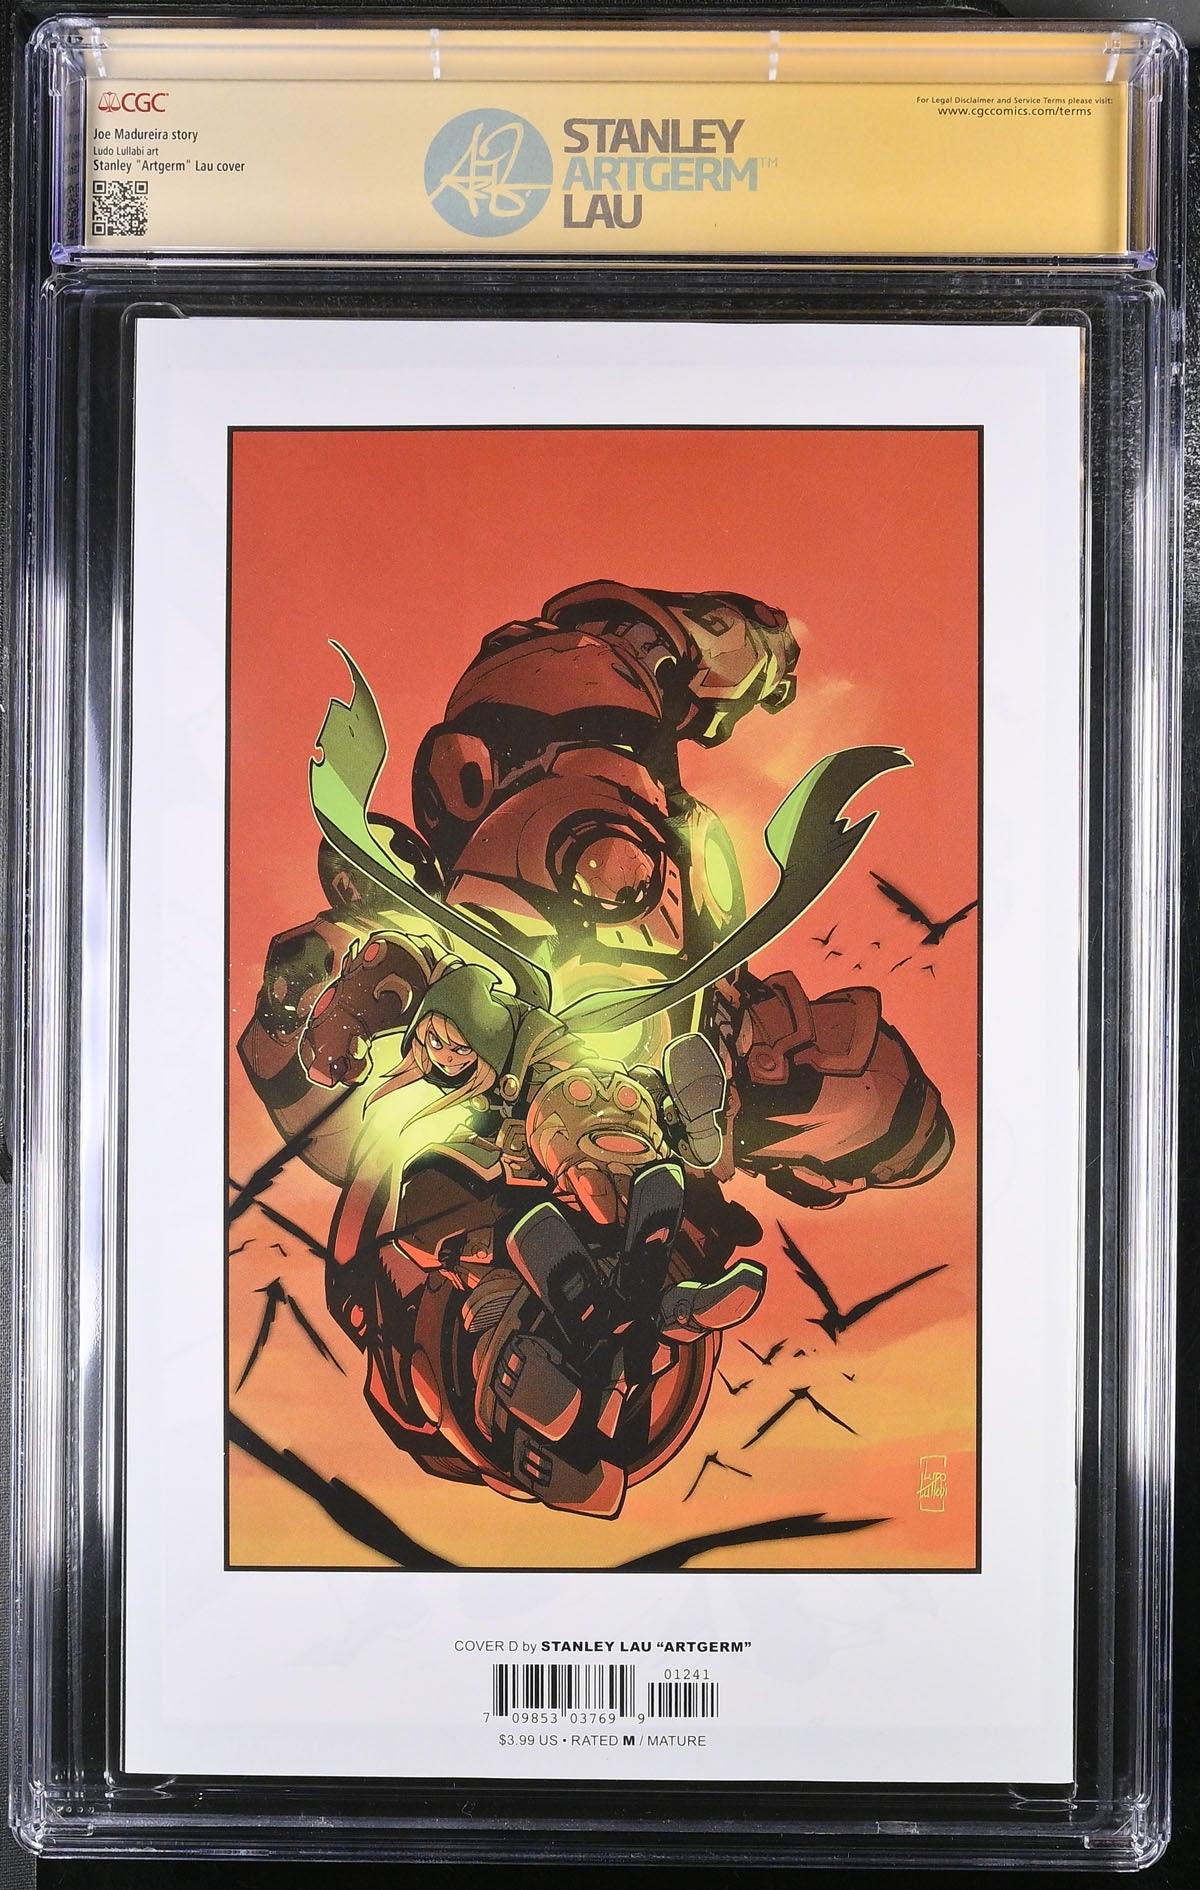 CGC BATTLE CHASERS #12 COVER D LAU VARIANT (9.8) SIGNATURE SERIES - SIGNED BY STANLEY "ARTGERM"